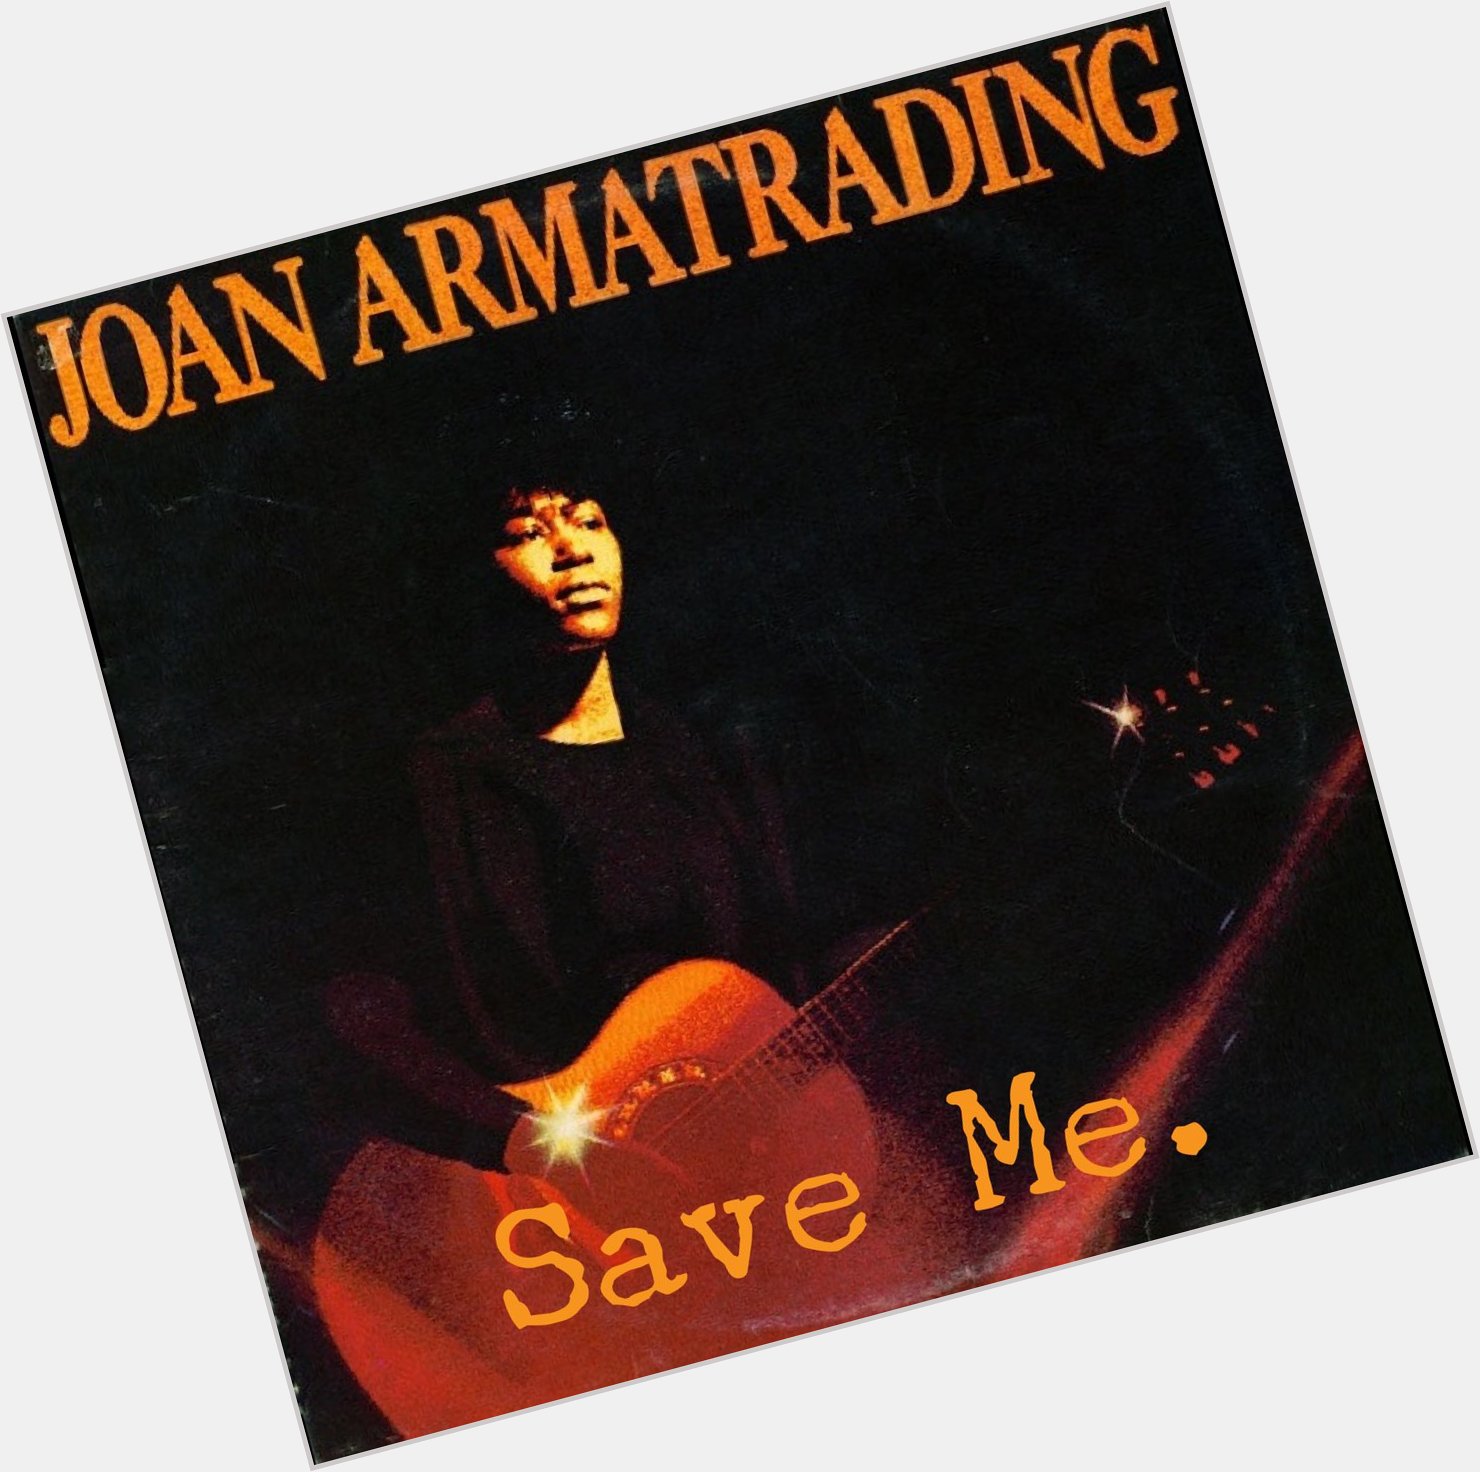  Save Me. What an incredible talent. Happy Birthday Joan Armatrading  